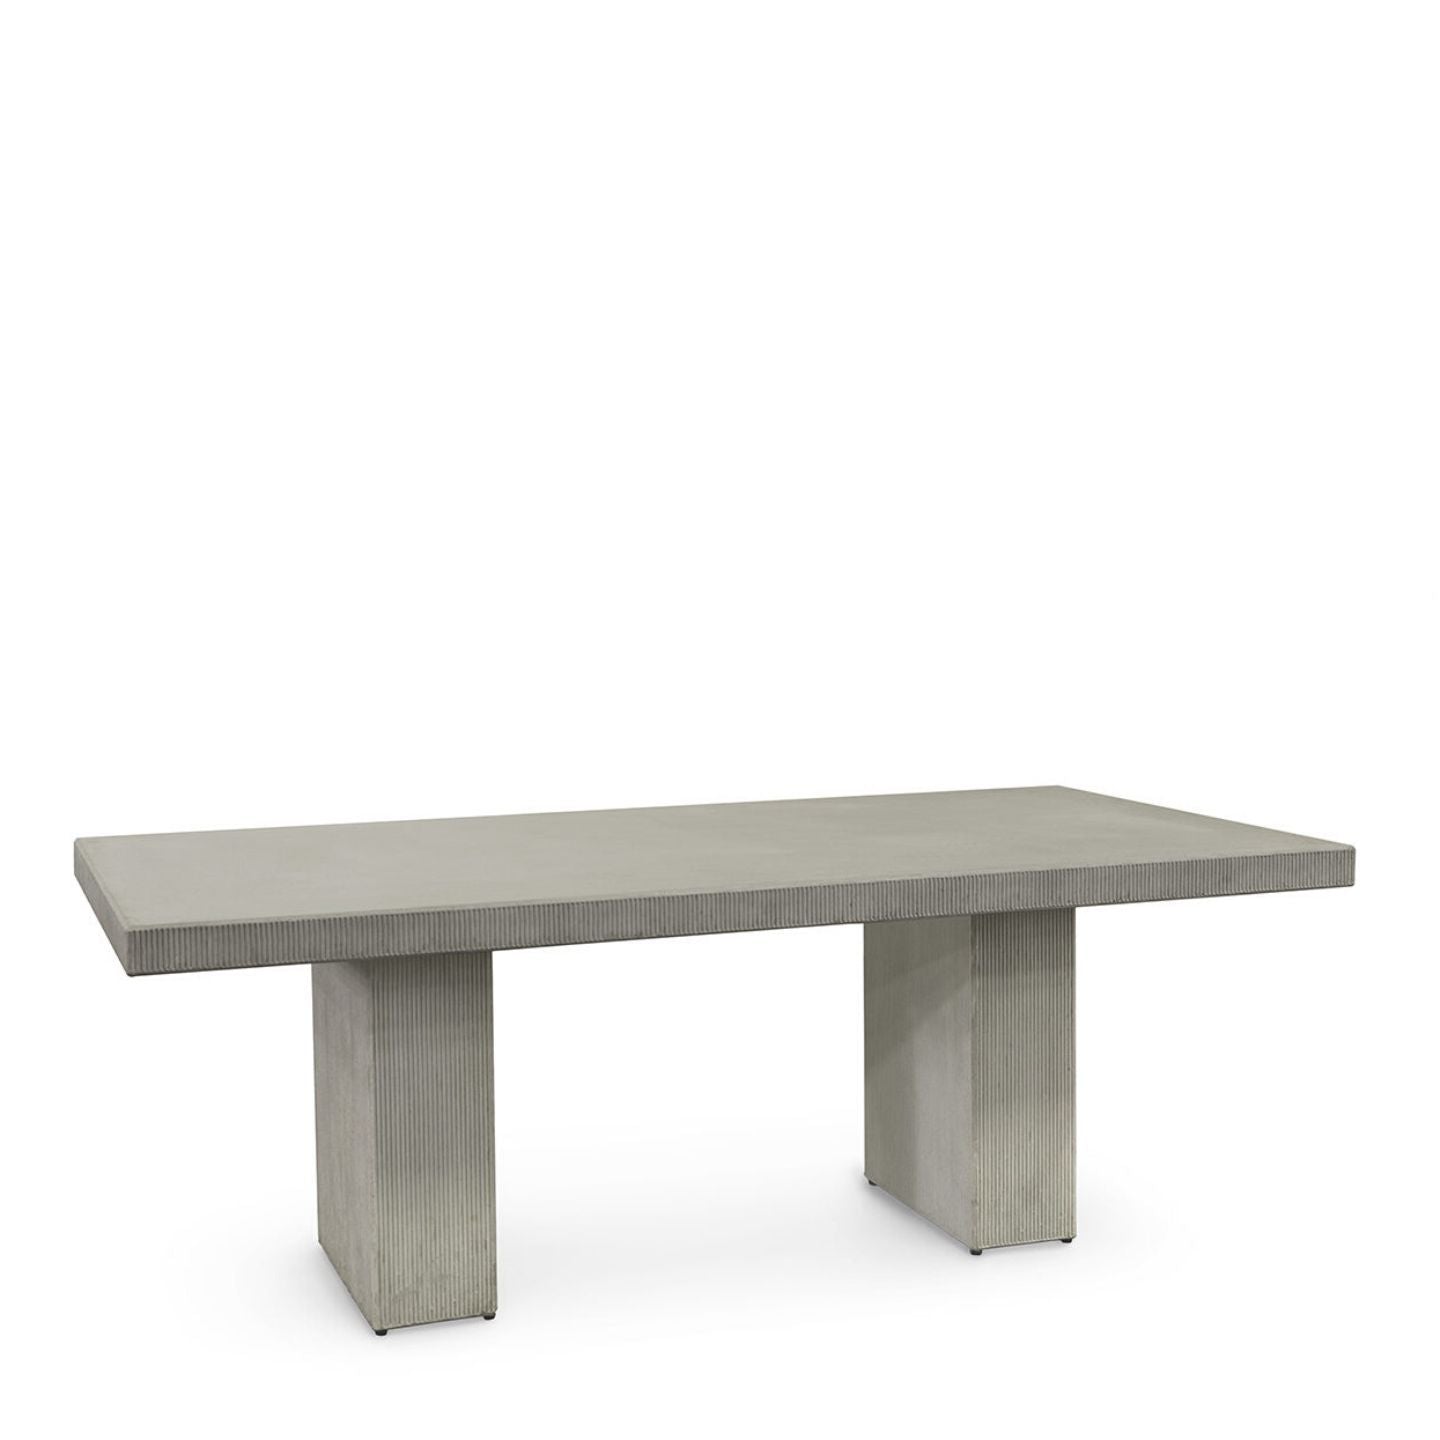 Delano Outdoor Rectangle Dining Table